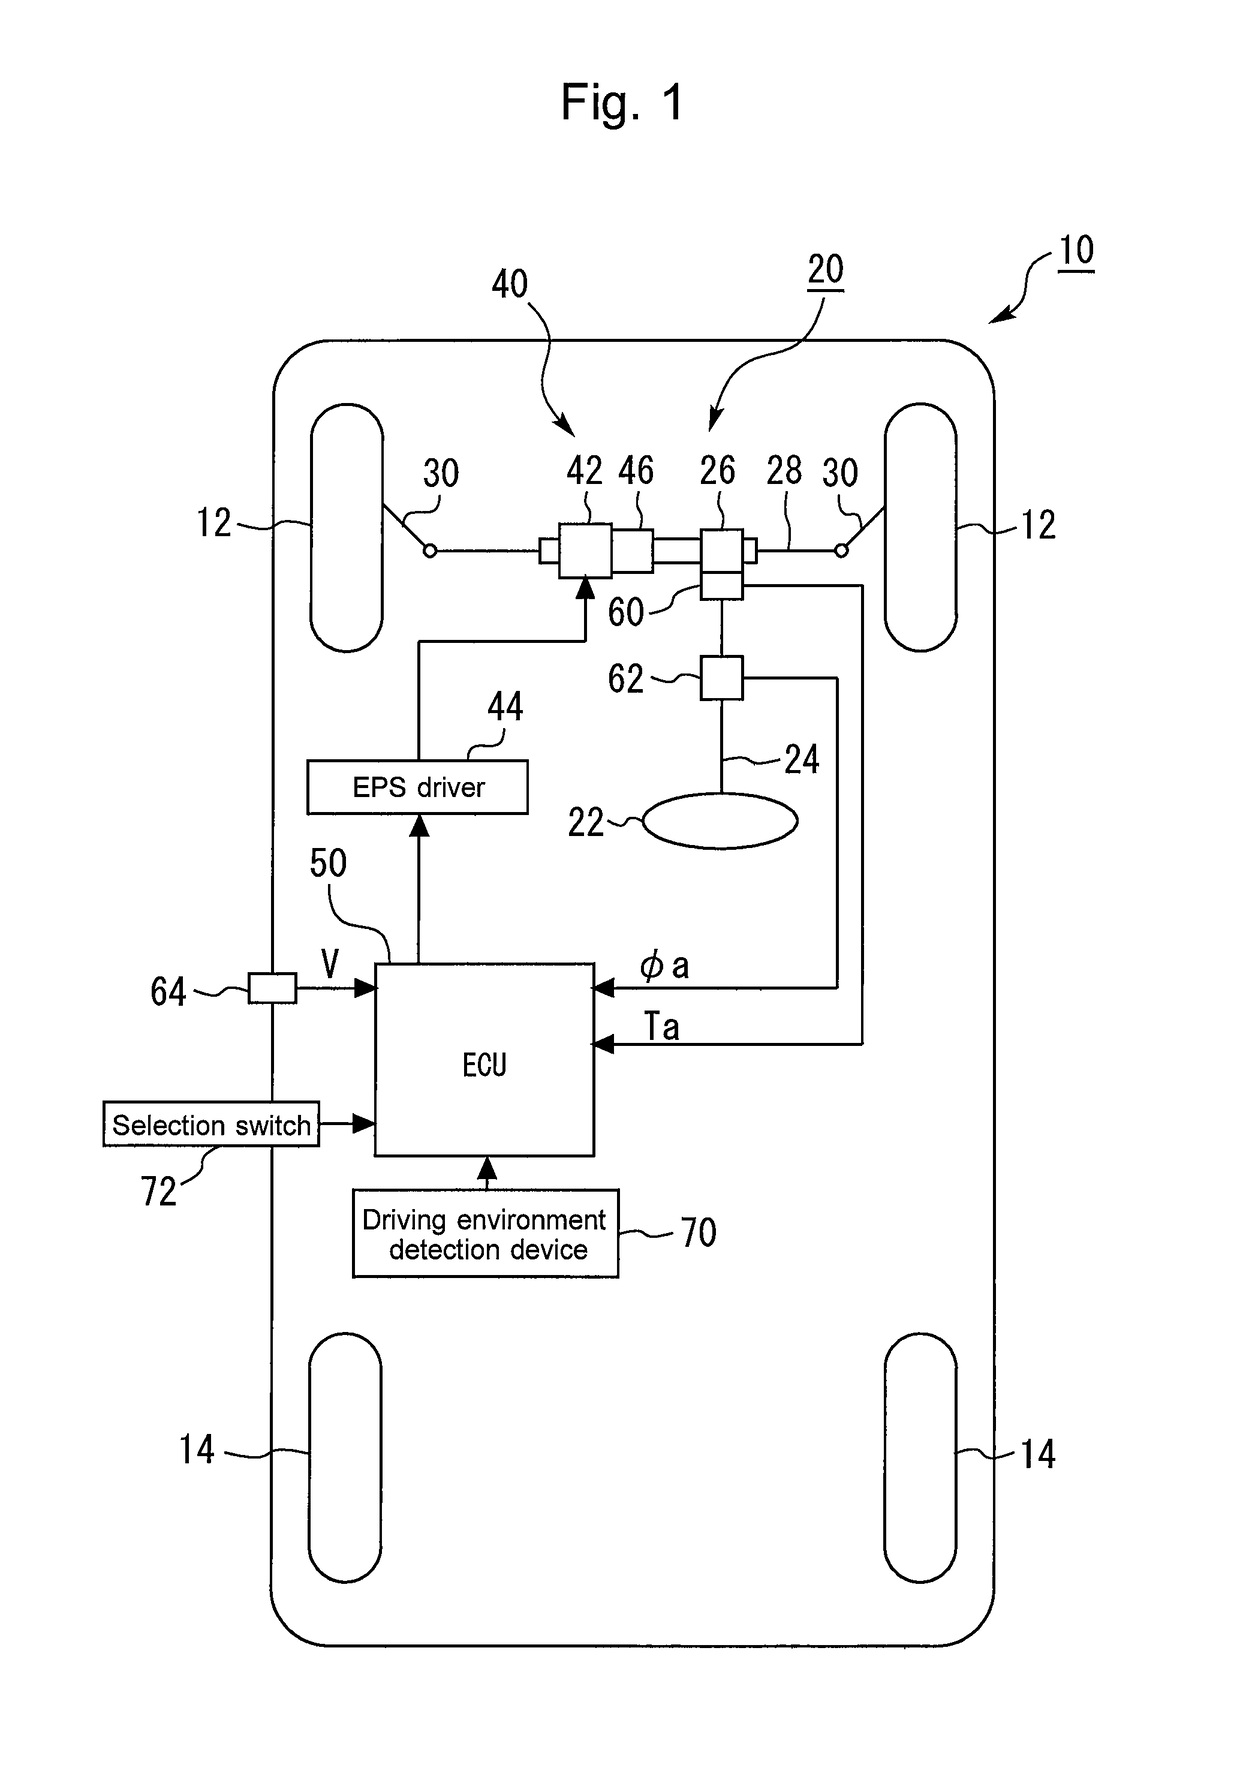 Driver assistance system for vehicle